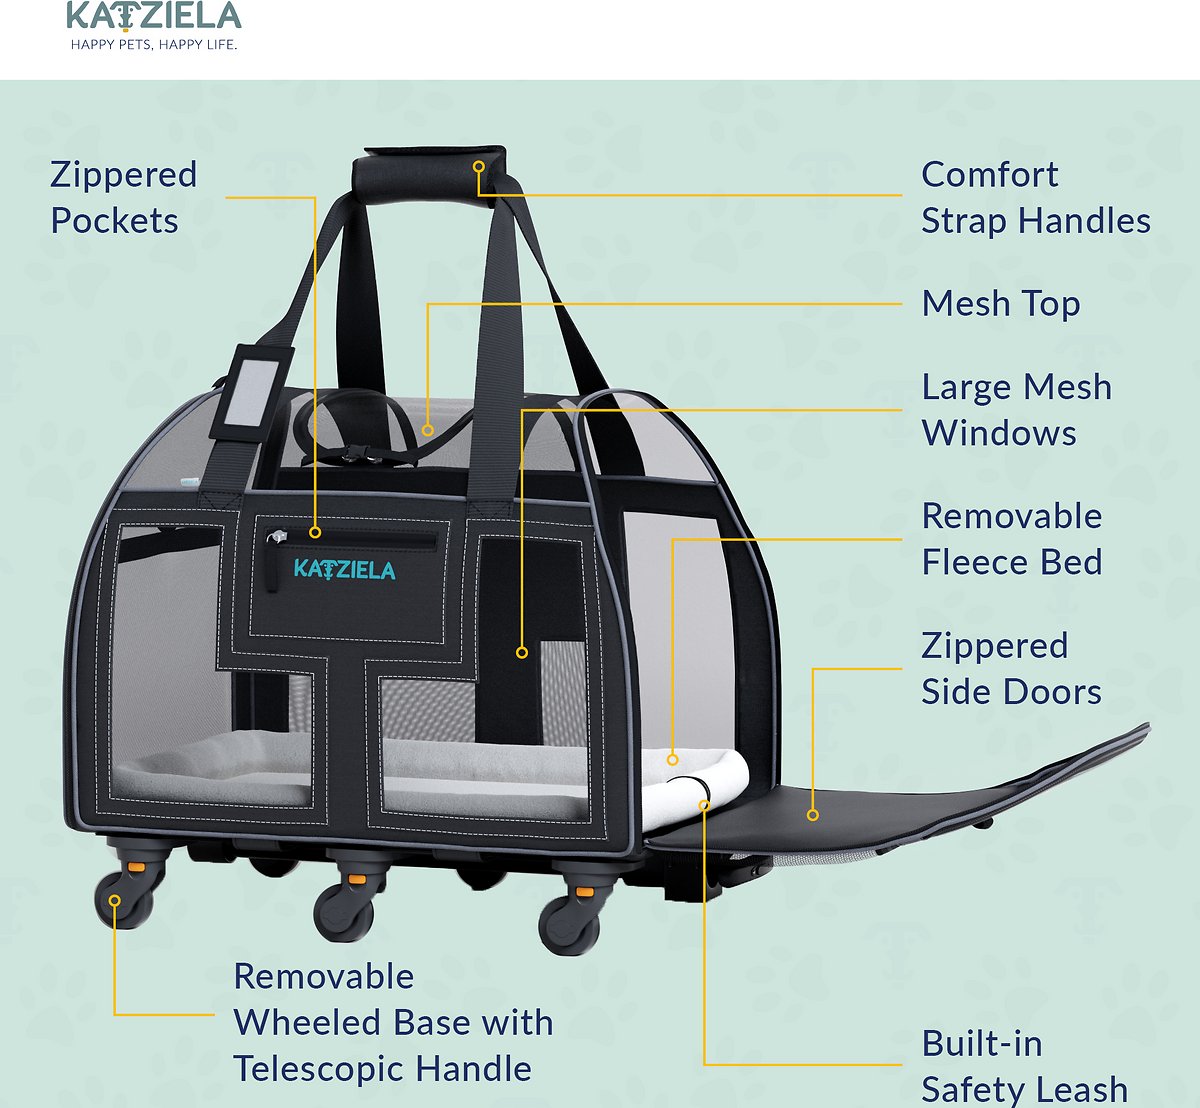 https://bigbigmart.com/wp-content/uploads/2022/07/Katziela-Rolling-Pet-Carrier-Airline-Approved-Pet-Carrier-with-Wheels-Luxury-Lorry-Deluxe-TSA-Approved-Cat-Carrier-with-Wheels-Small-Airline-Approved-Dog-Carrier-Trolley-Plane-Carry-On-Bag4.jpg